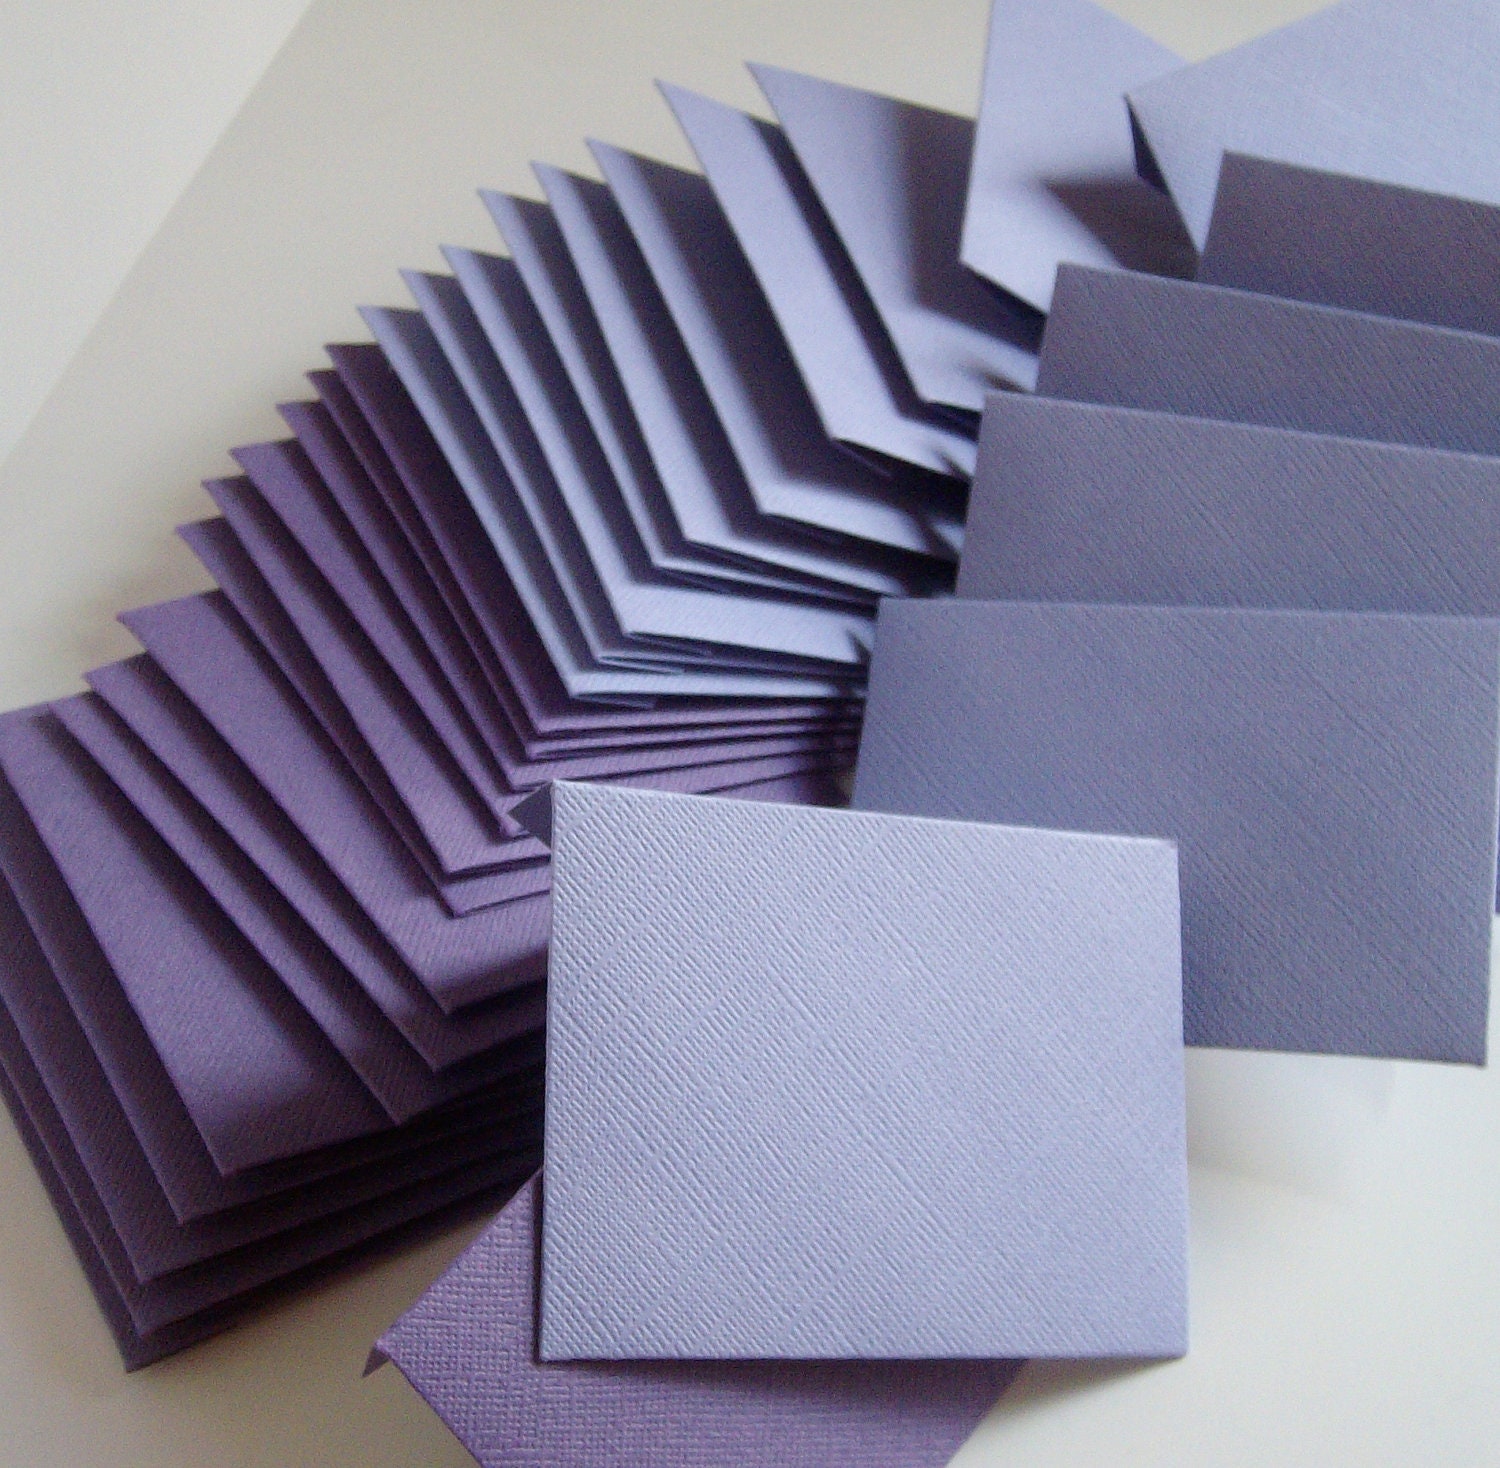 30 lavender and purple textured small envelopes, wedding guest book envelope,business card envelope, gift card envelope, size 1 envelope - WoolAndMore